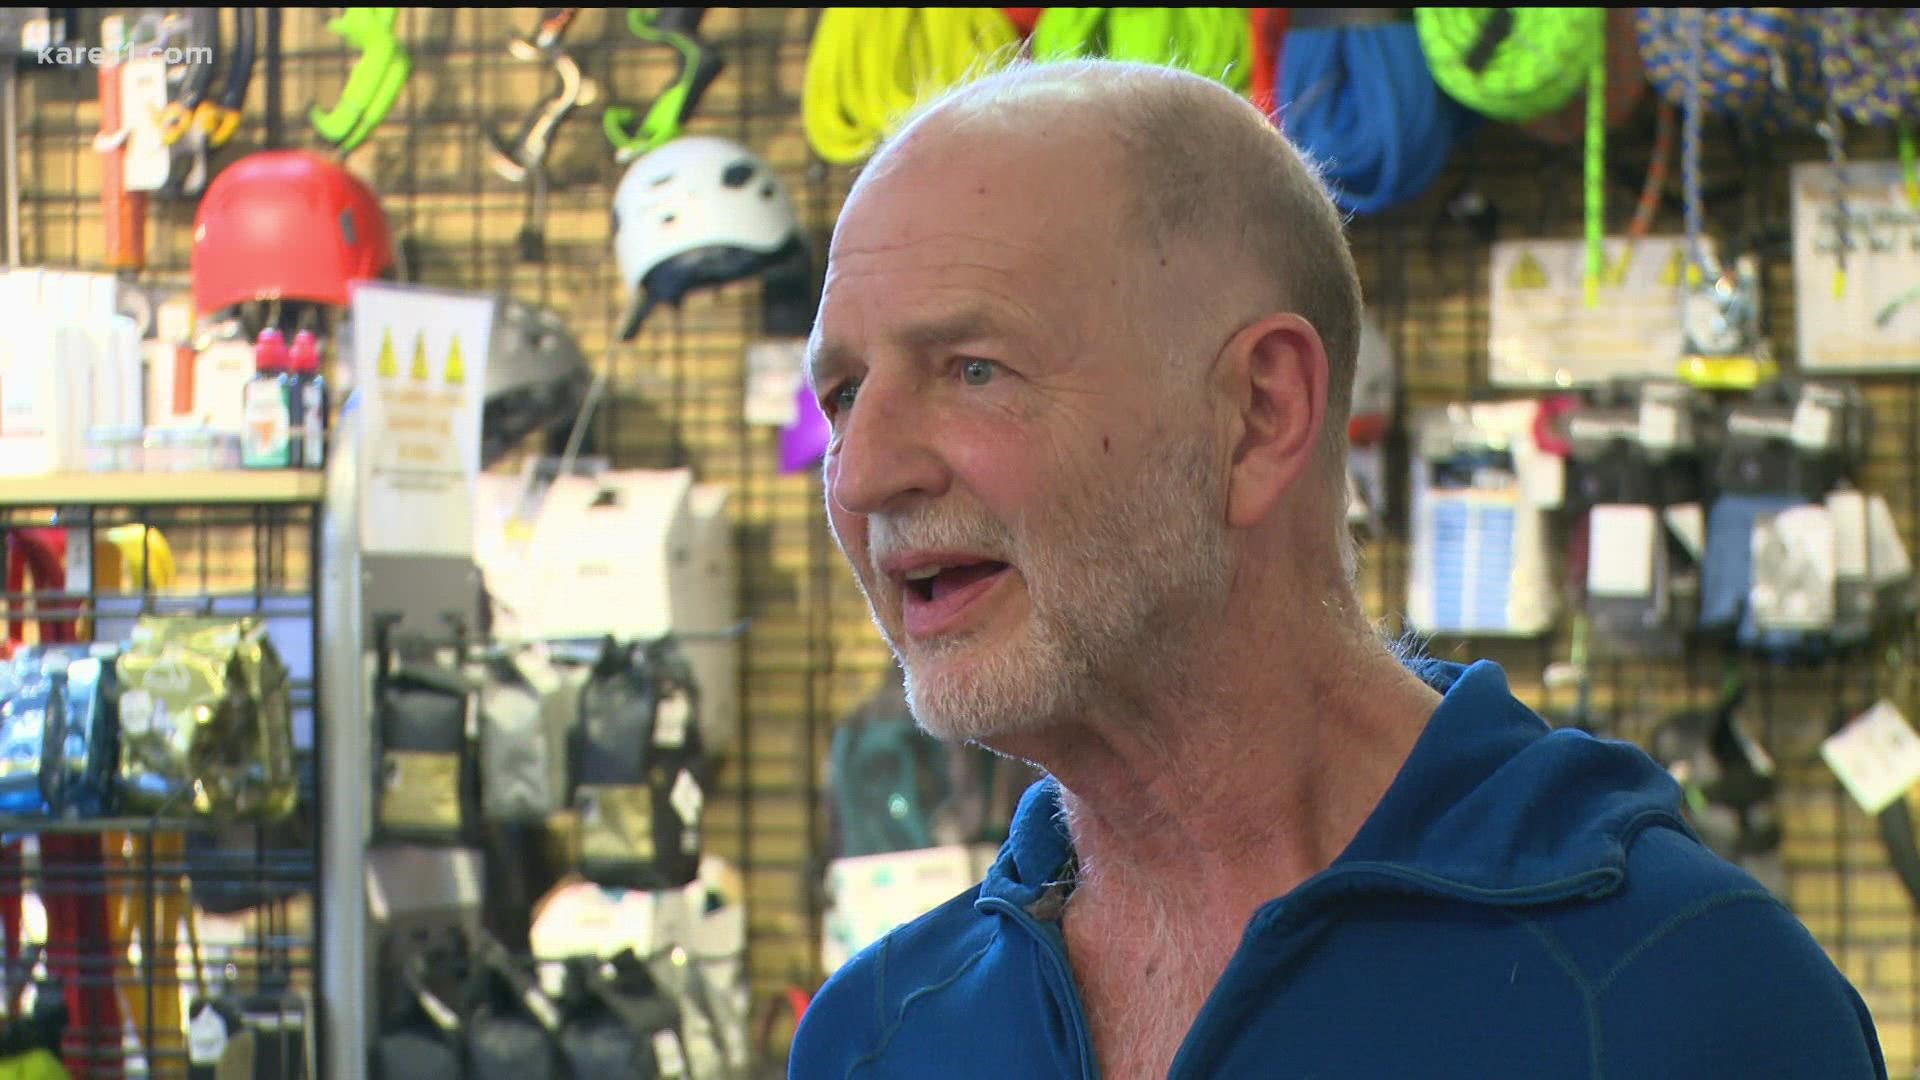 Owner and founder Rod Johnson is looking to hire his future replacement to lead the popular outdoor equipment retailer.